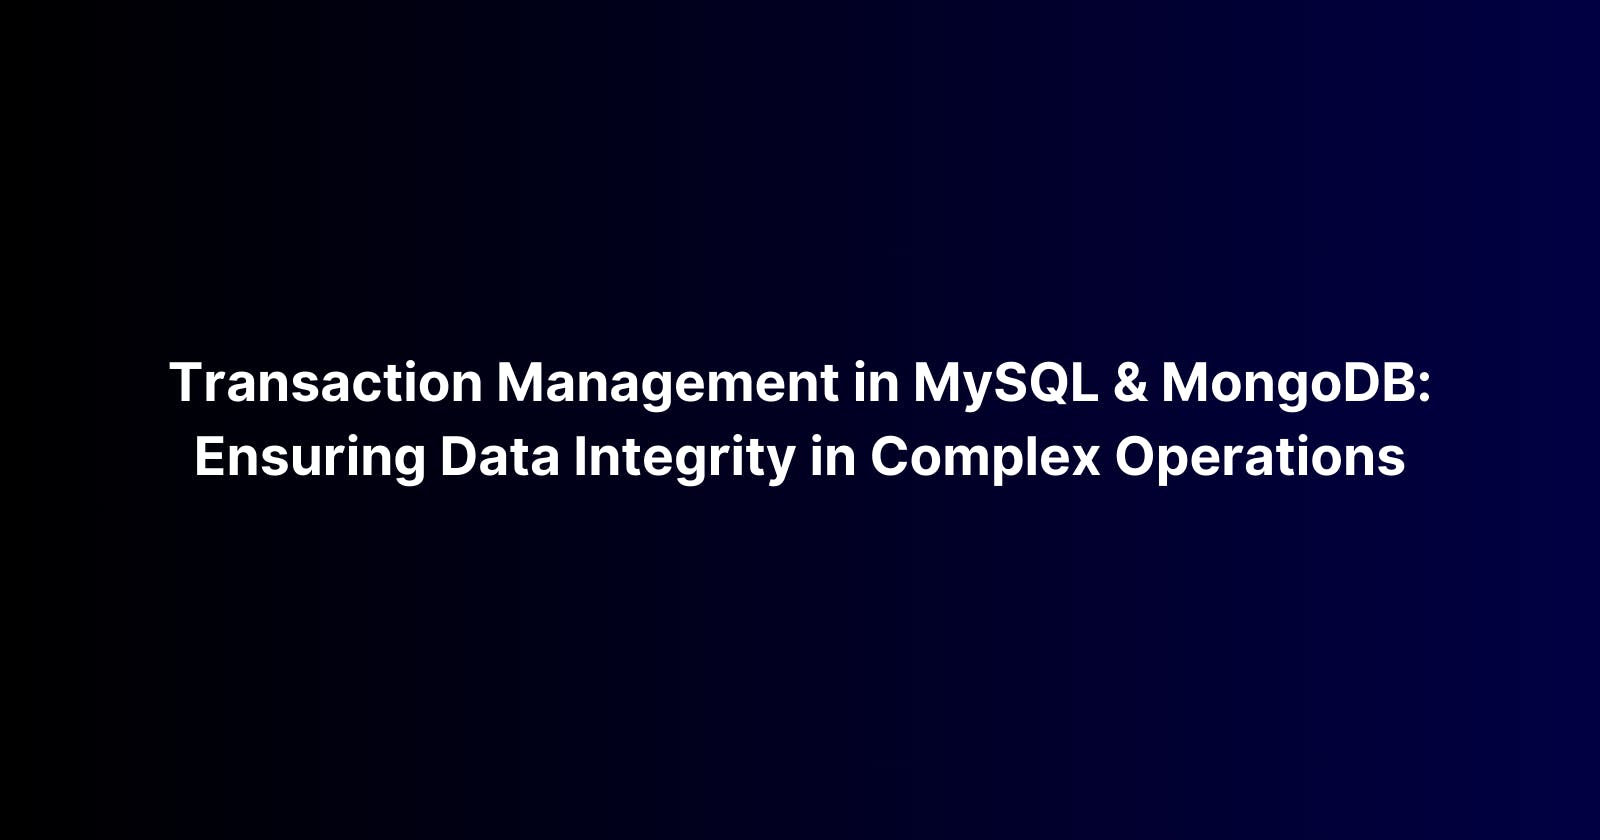 Transaction Management in MySQL and MongoDB: Ensuring Data Integrity in Complex Operations